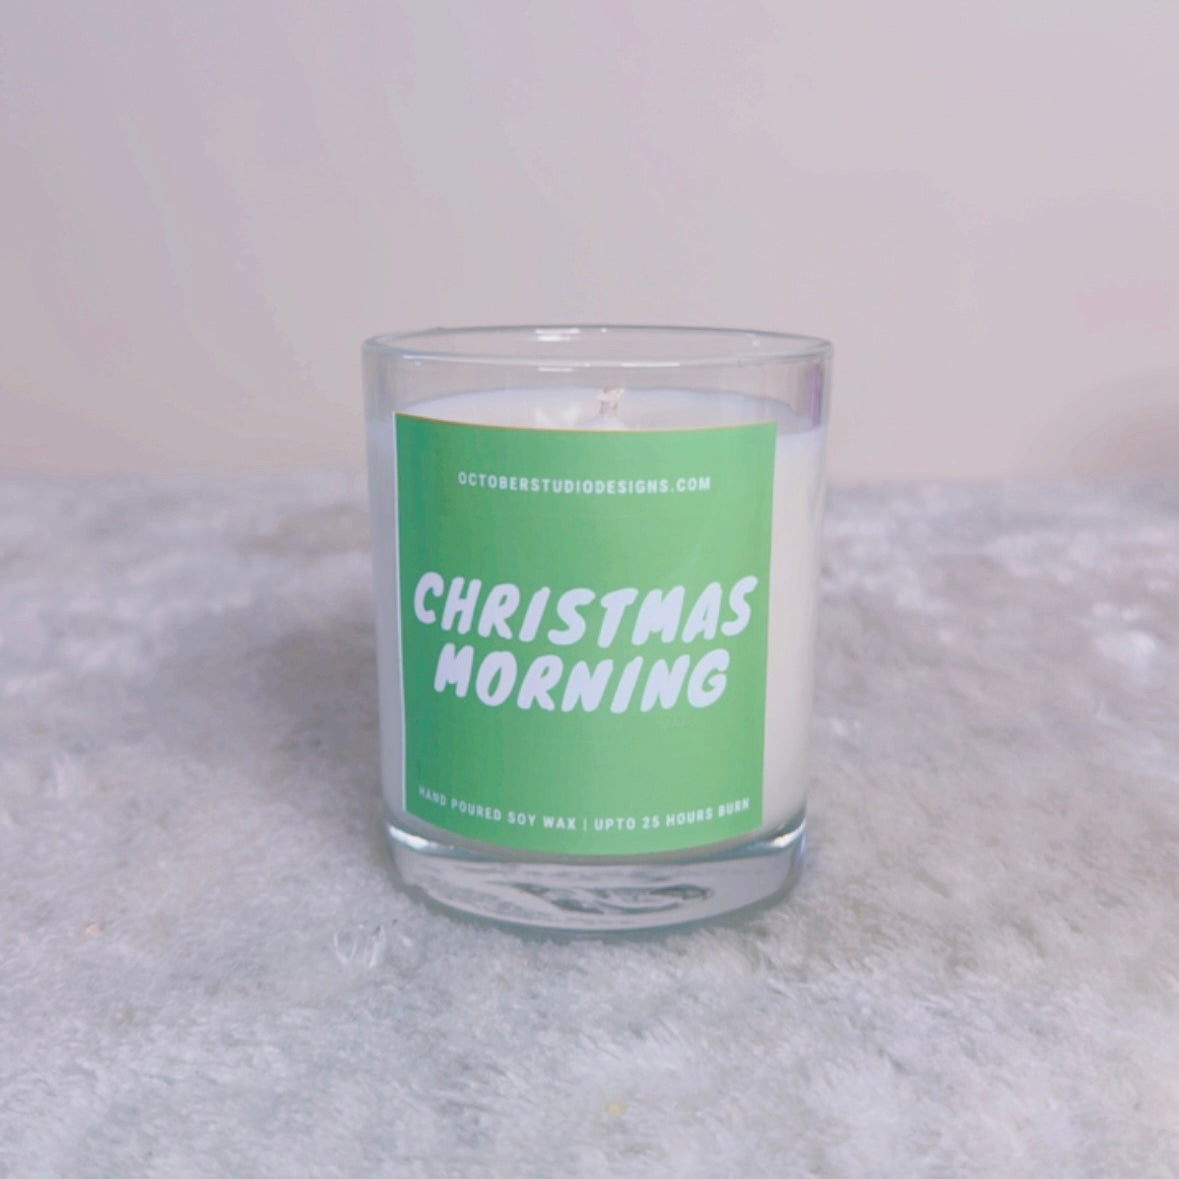 Christmas Morning 20cl Candle